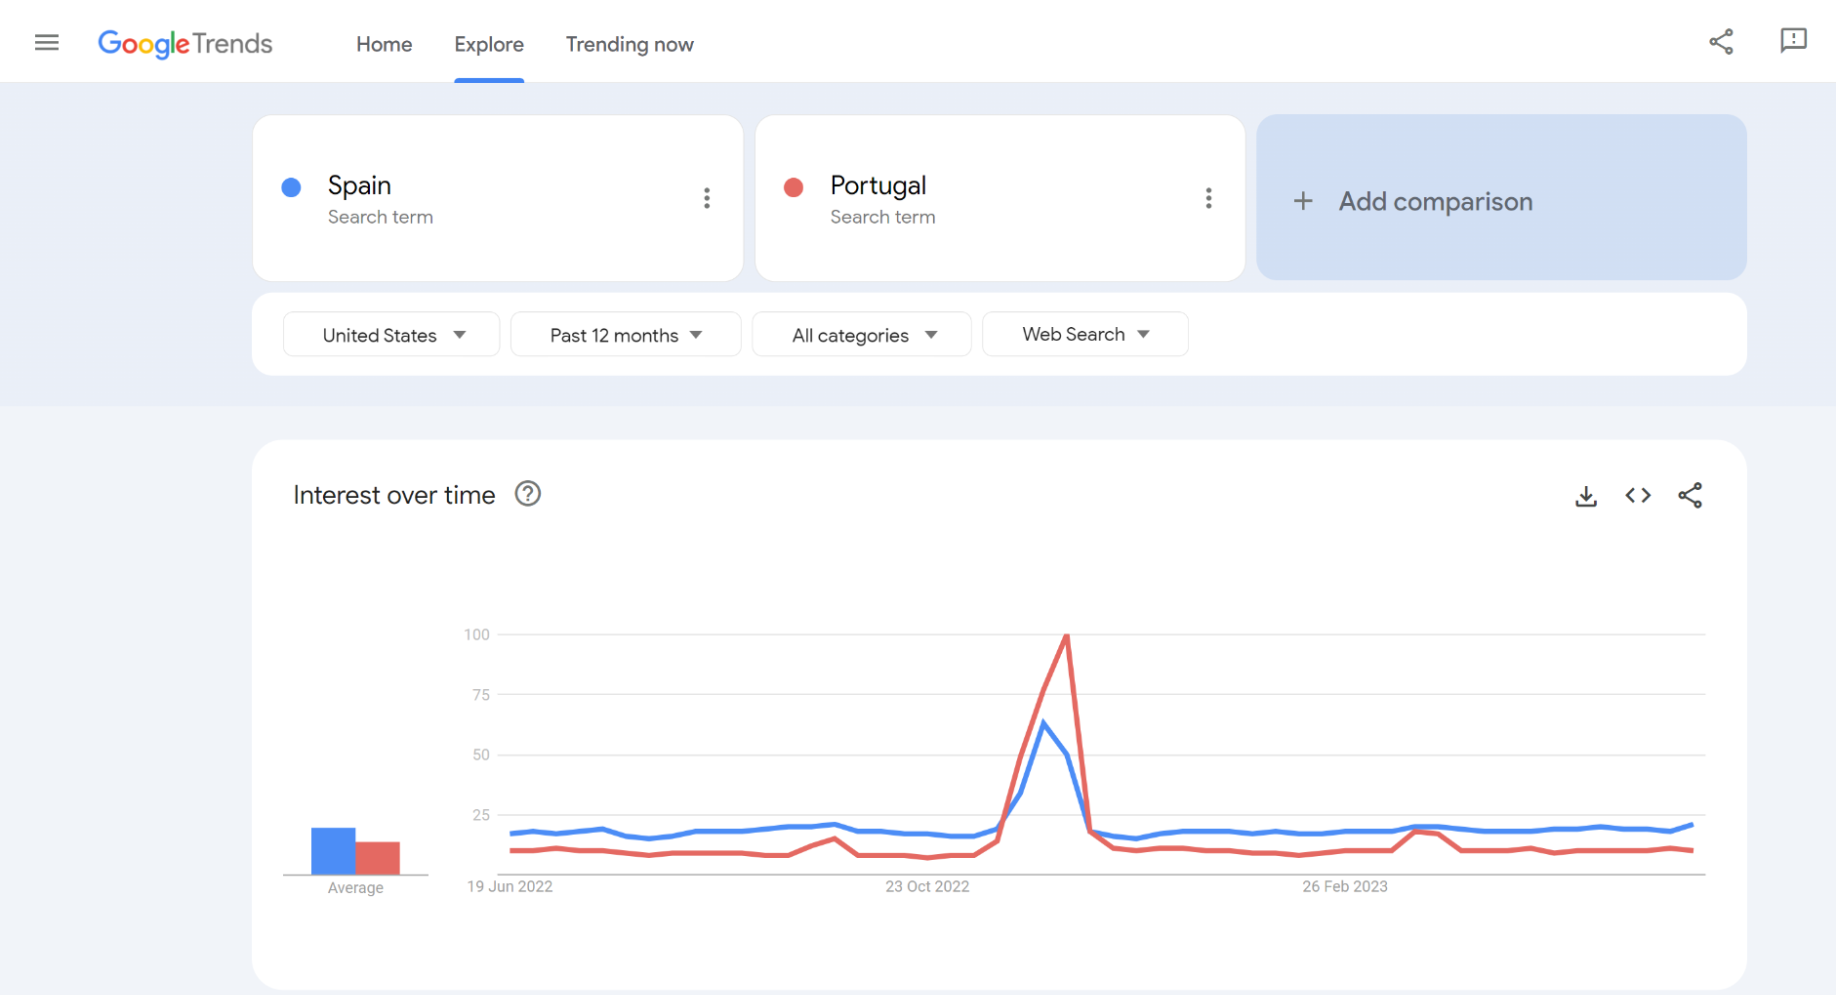 A screenshot featuring the comparison of Search Trends in Google Trends: Spain vs Portugal